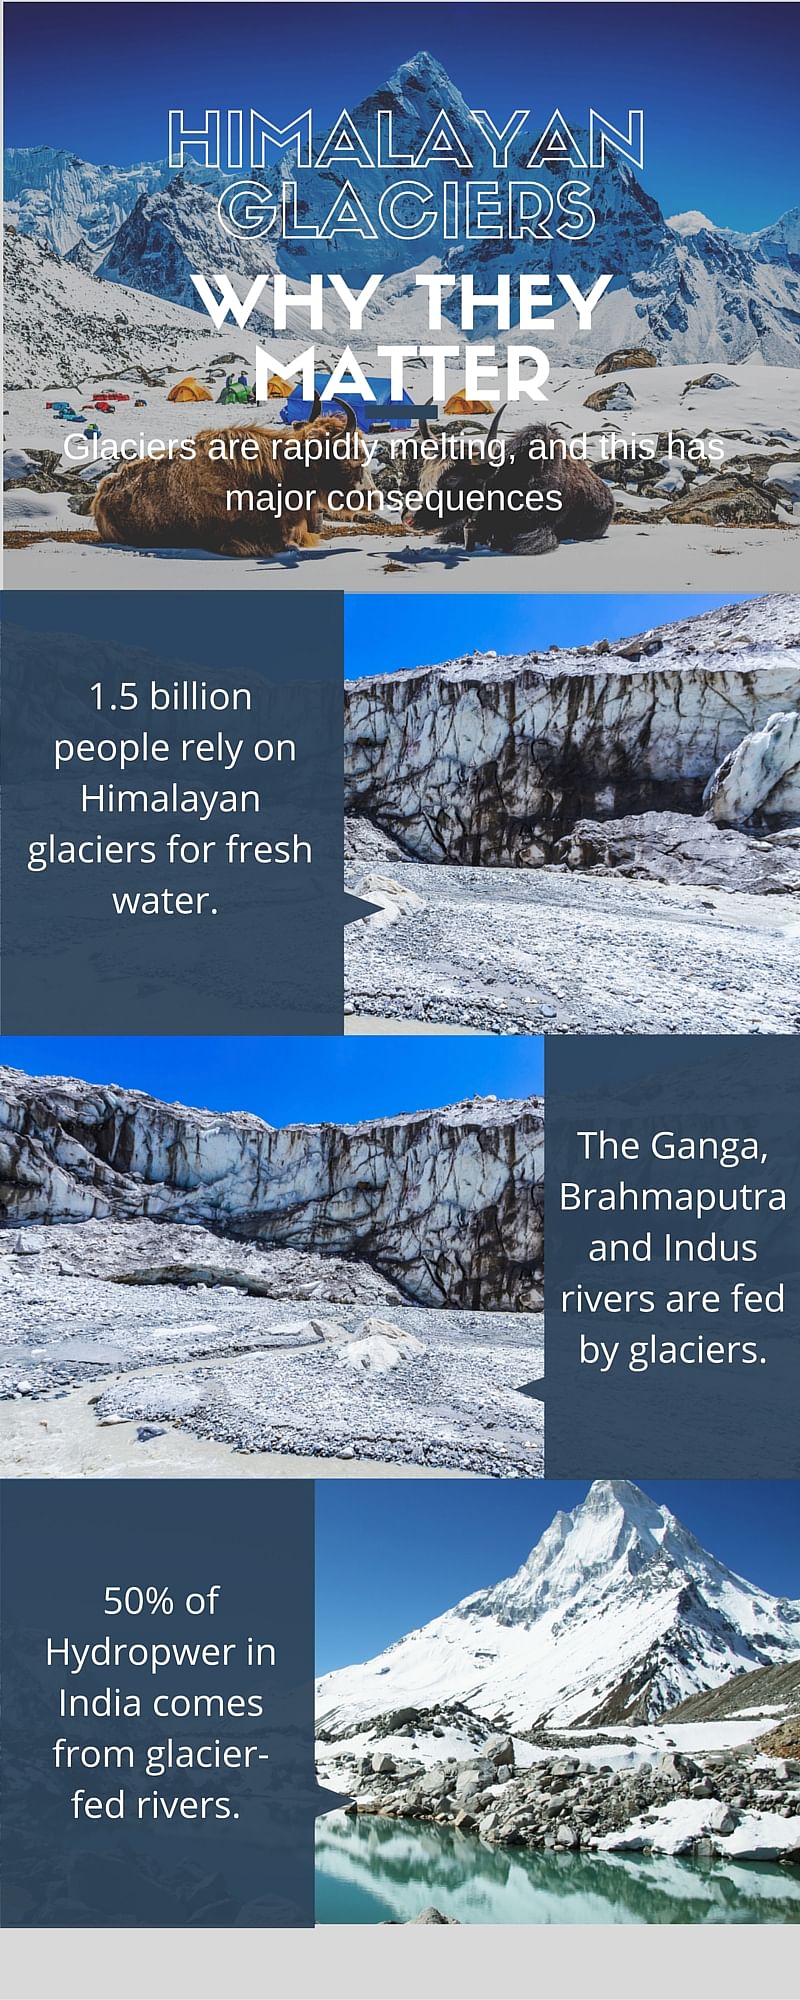 Glacier melt could have severe consequences for hundreds of millions of people.